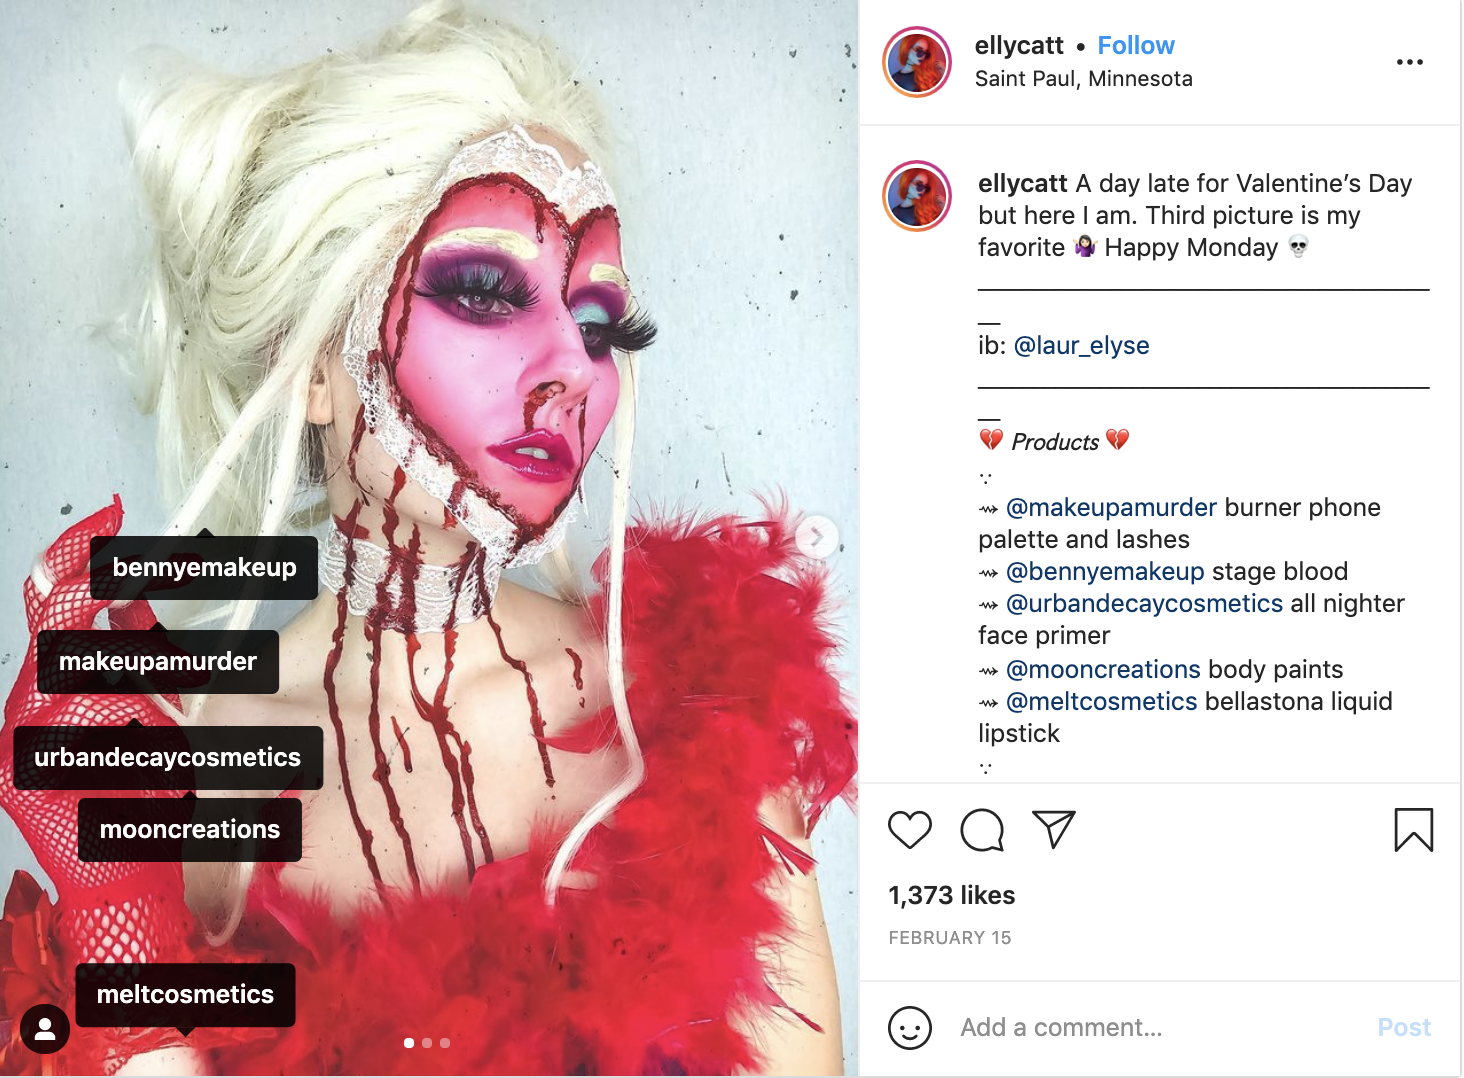 Screenshot of Instagram post featuring influencer in extreme Valentine's Day (or perhaps anti Valentine's Day) makeup. Her entire face is a pink, red, and purple heart surrounded by lace. Face blood trickles from the heart down her neck